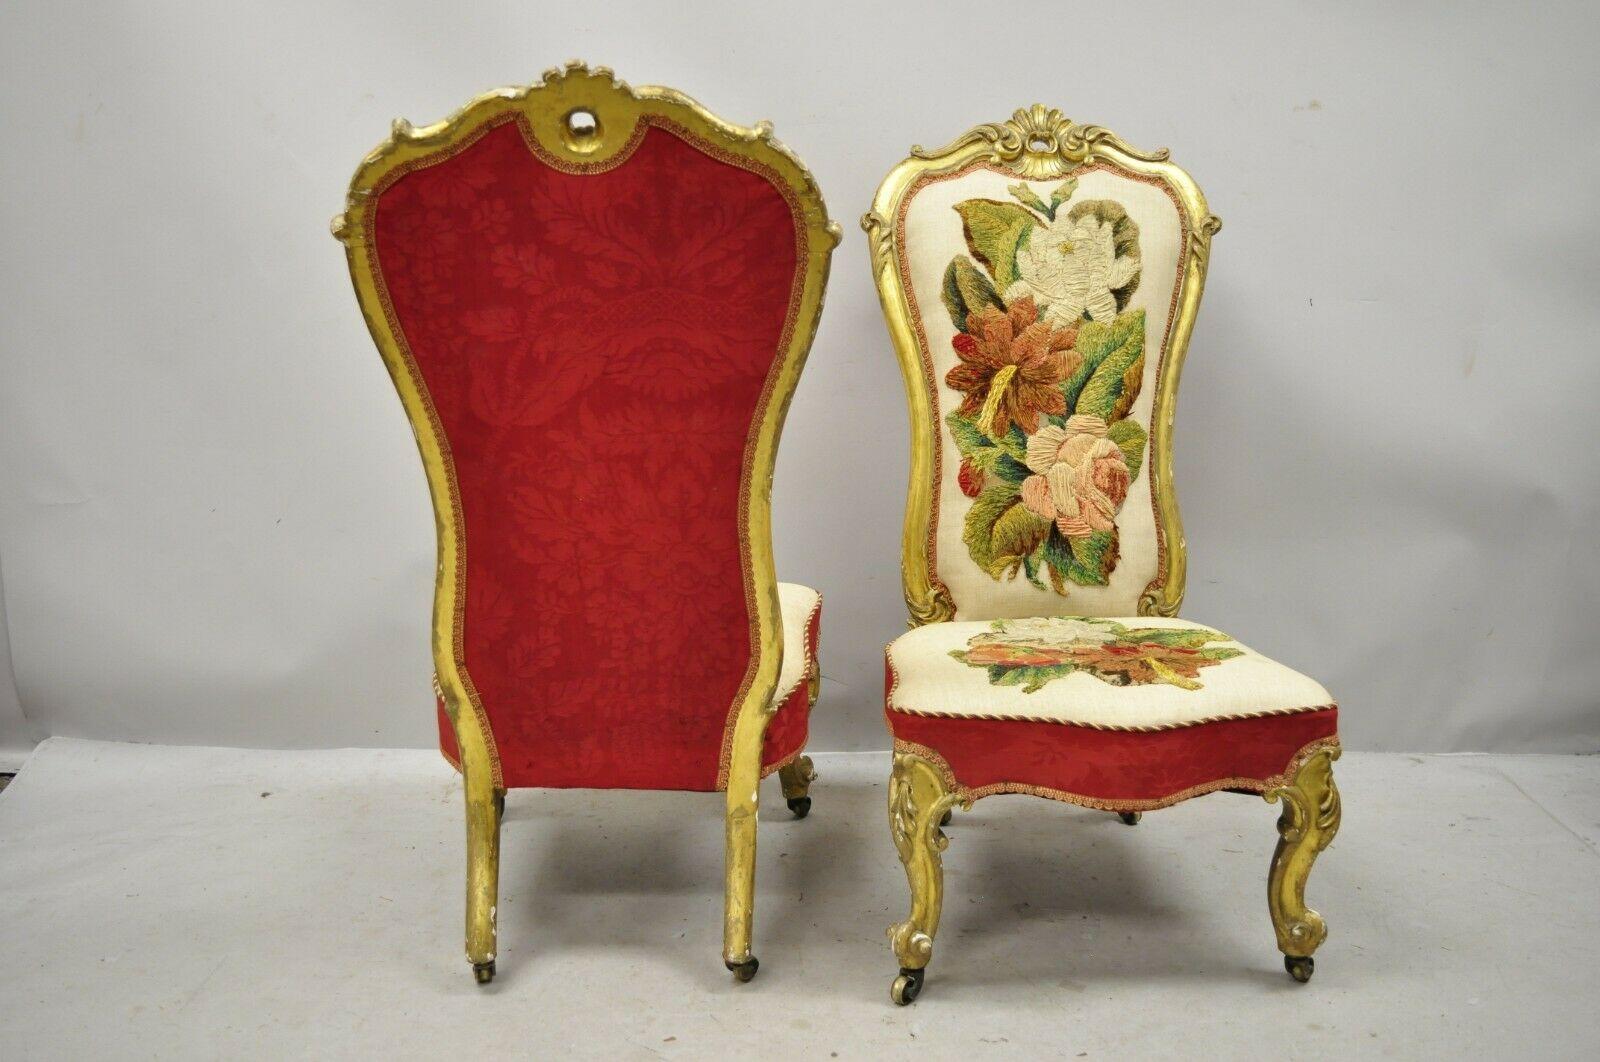 Antique French Victorian Gold Gilt Rococo Revival Slipper Parlor Chairs, a Pair For Sale 3